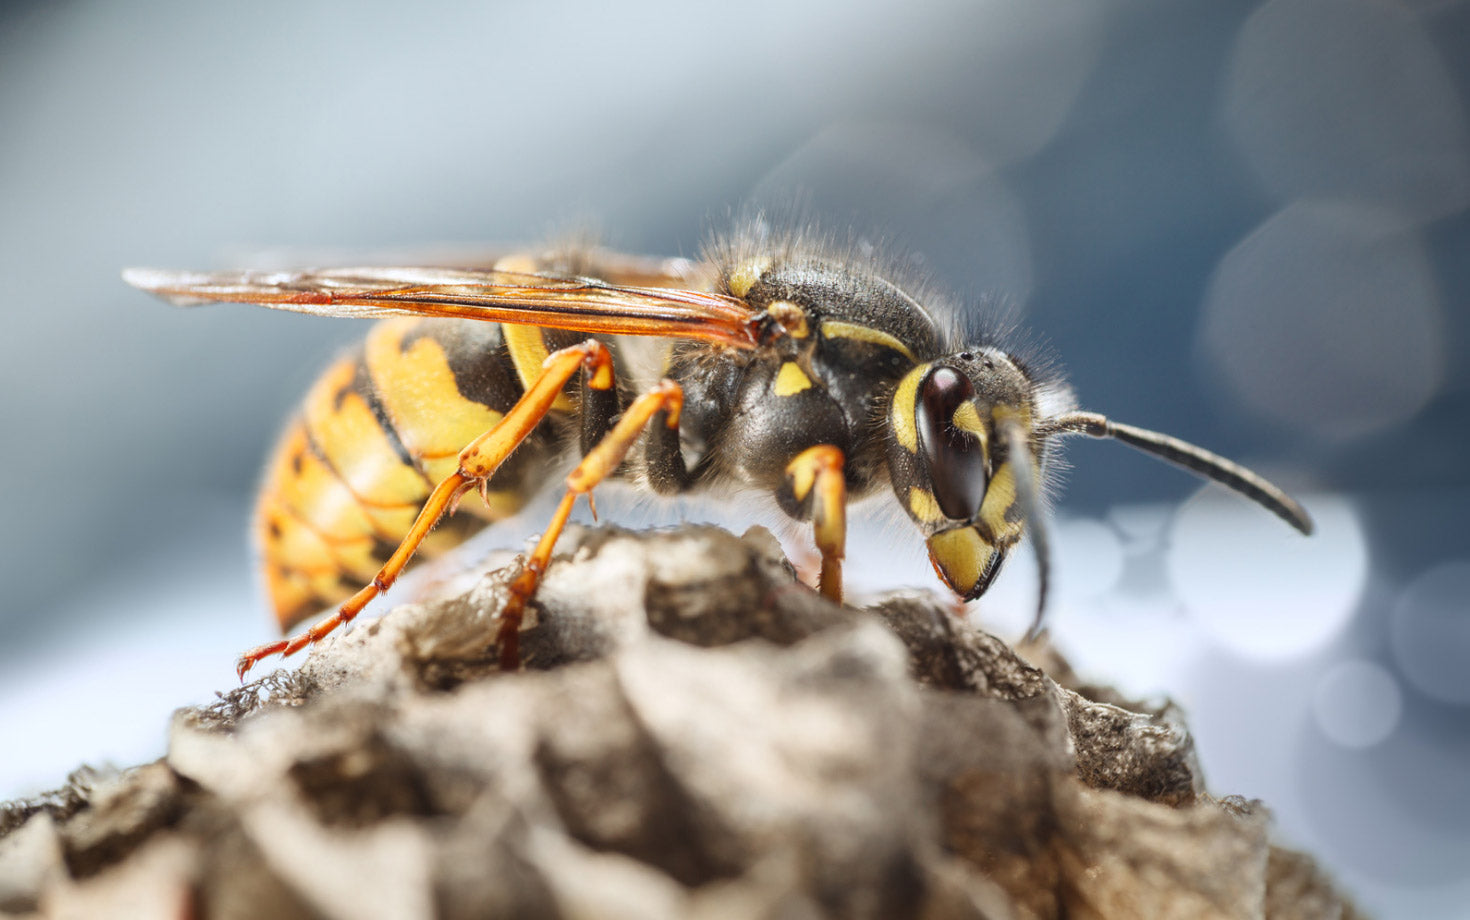 Queen wasps construct the nest with a pulp-like paste.